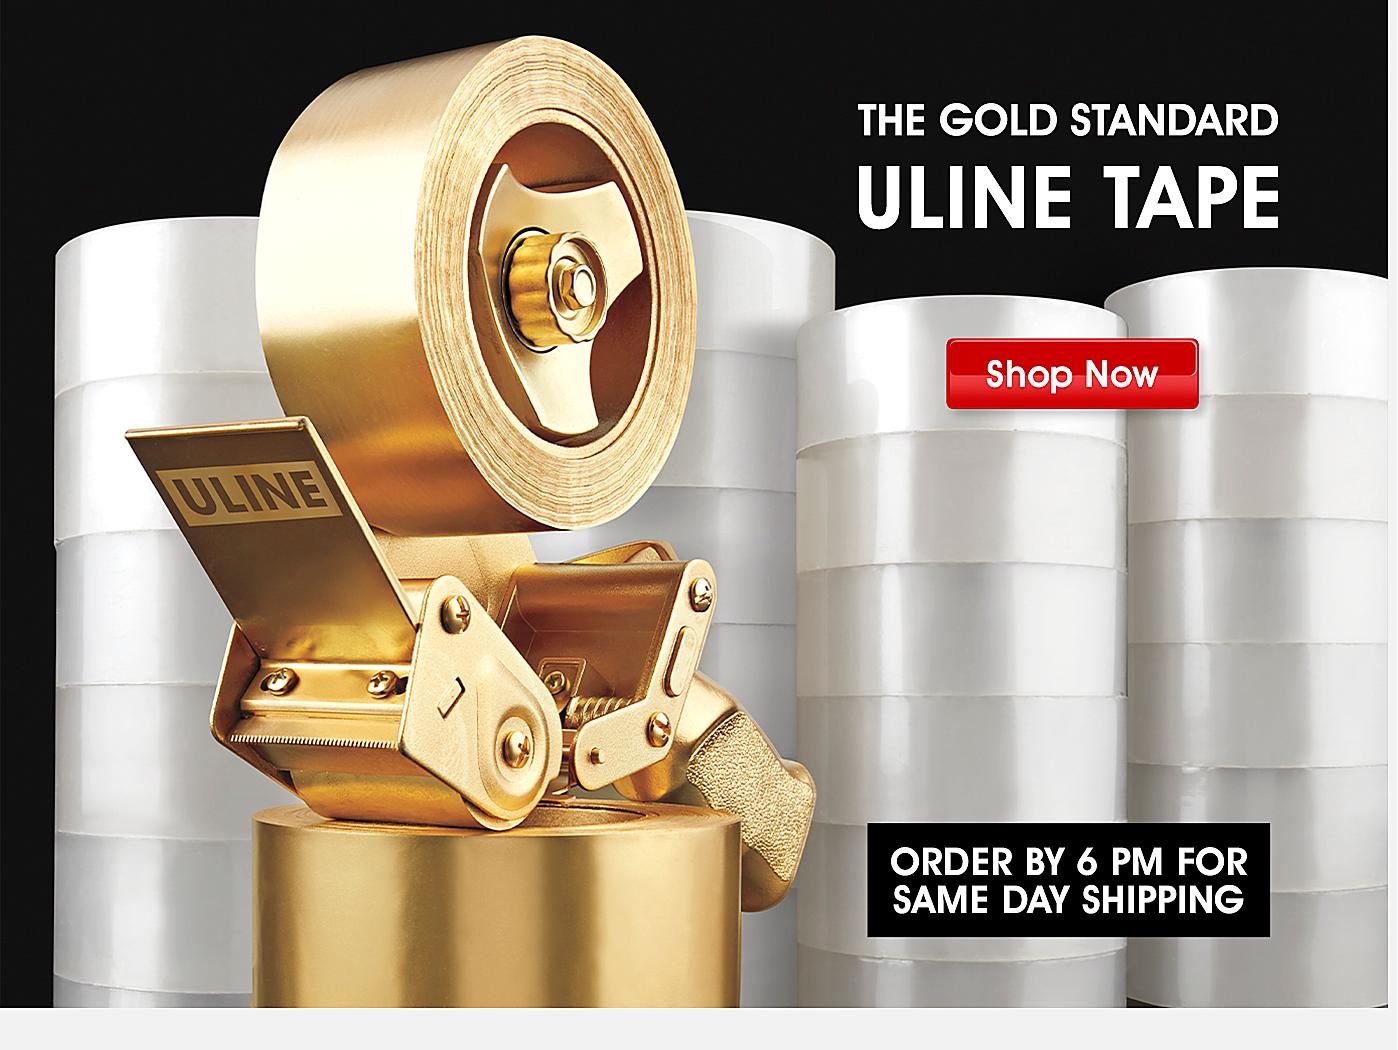 The gold standard. Uline tape. Shop Now. ORDER BY 6 PM FOR SAME DAY SHIPPING